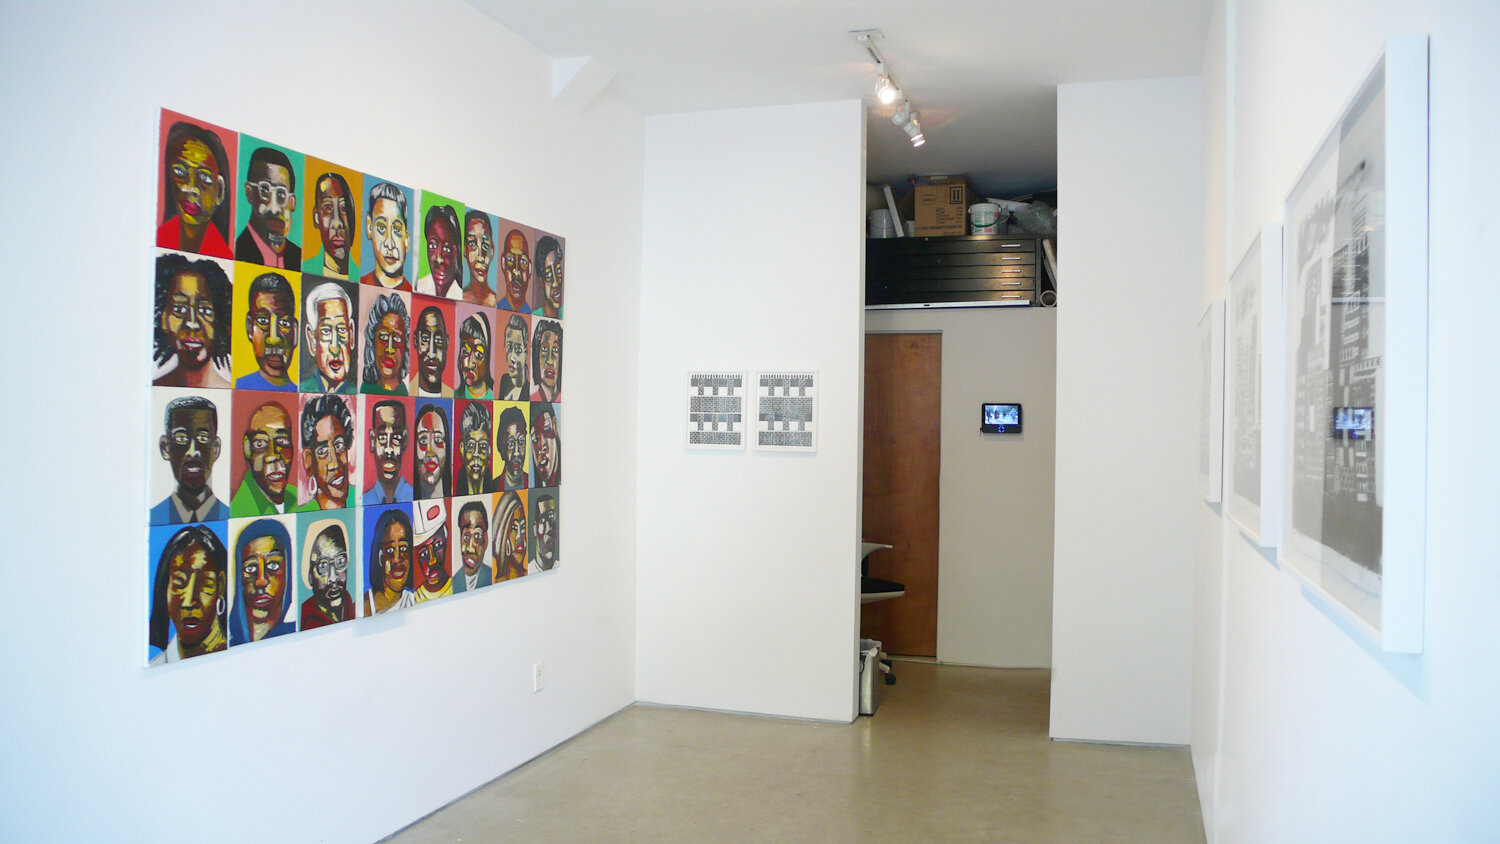 Installation image from the 2009 Frederick Hayes exhibition, BUILDING AN EMPIRE, at Cindy Rucker Gallery